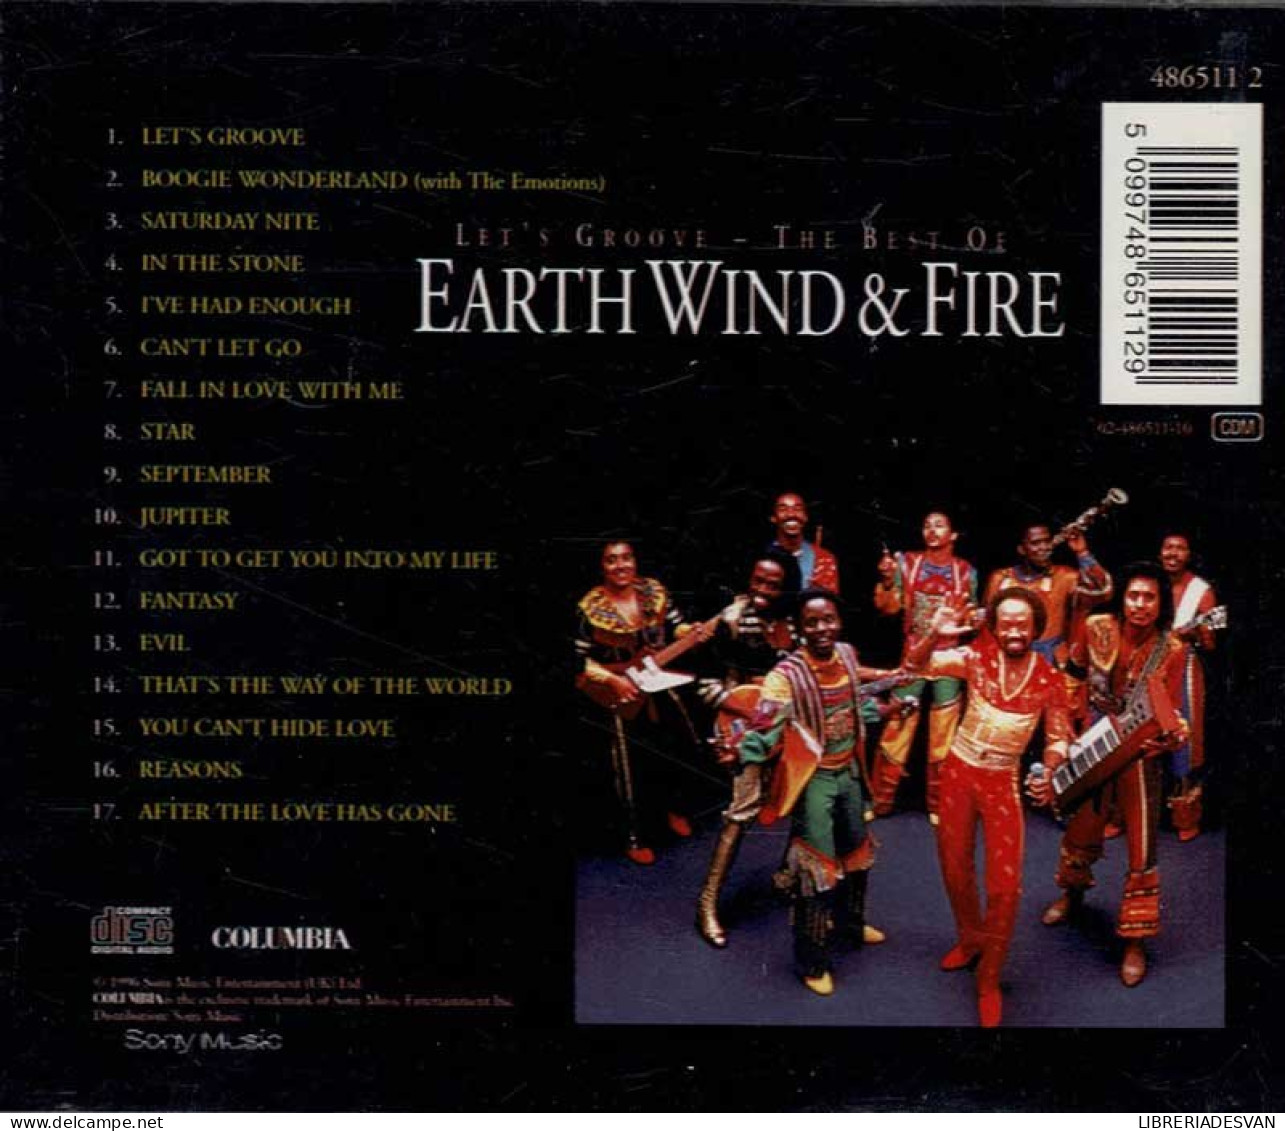 Earth Wind & Fire - Let's Groove - The Best Of Earth Wind & Fire. CD - Dance, Techno & House